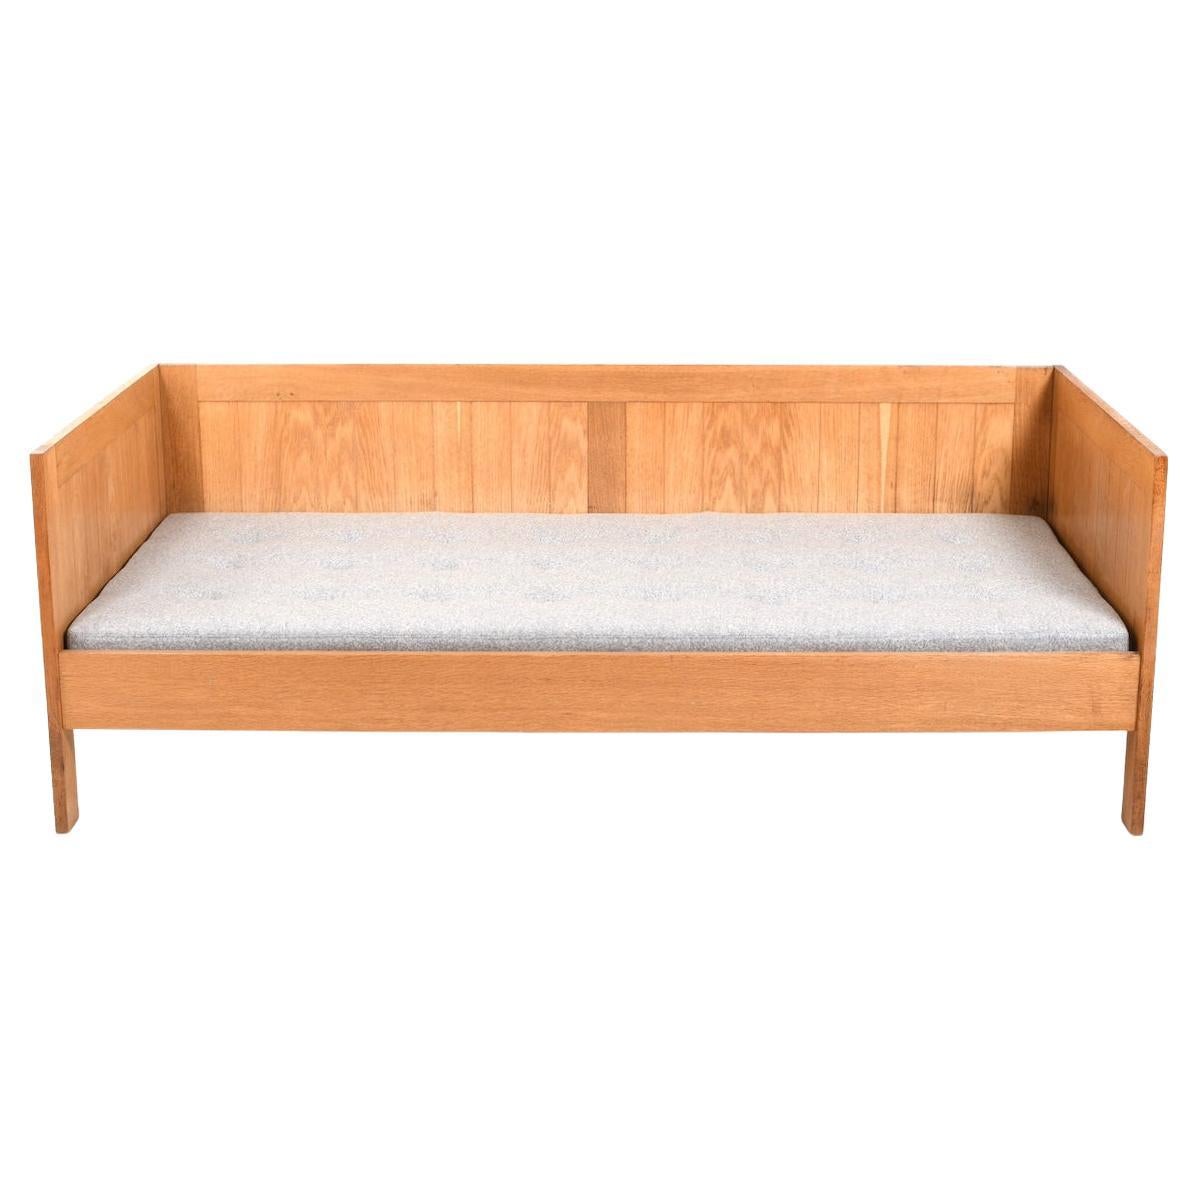 Fine Danish Box Sofa / Daybed in Oak 1960s. New Upholstered For Sale